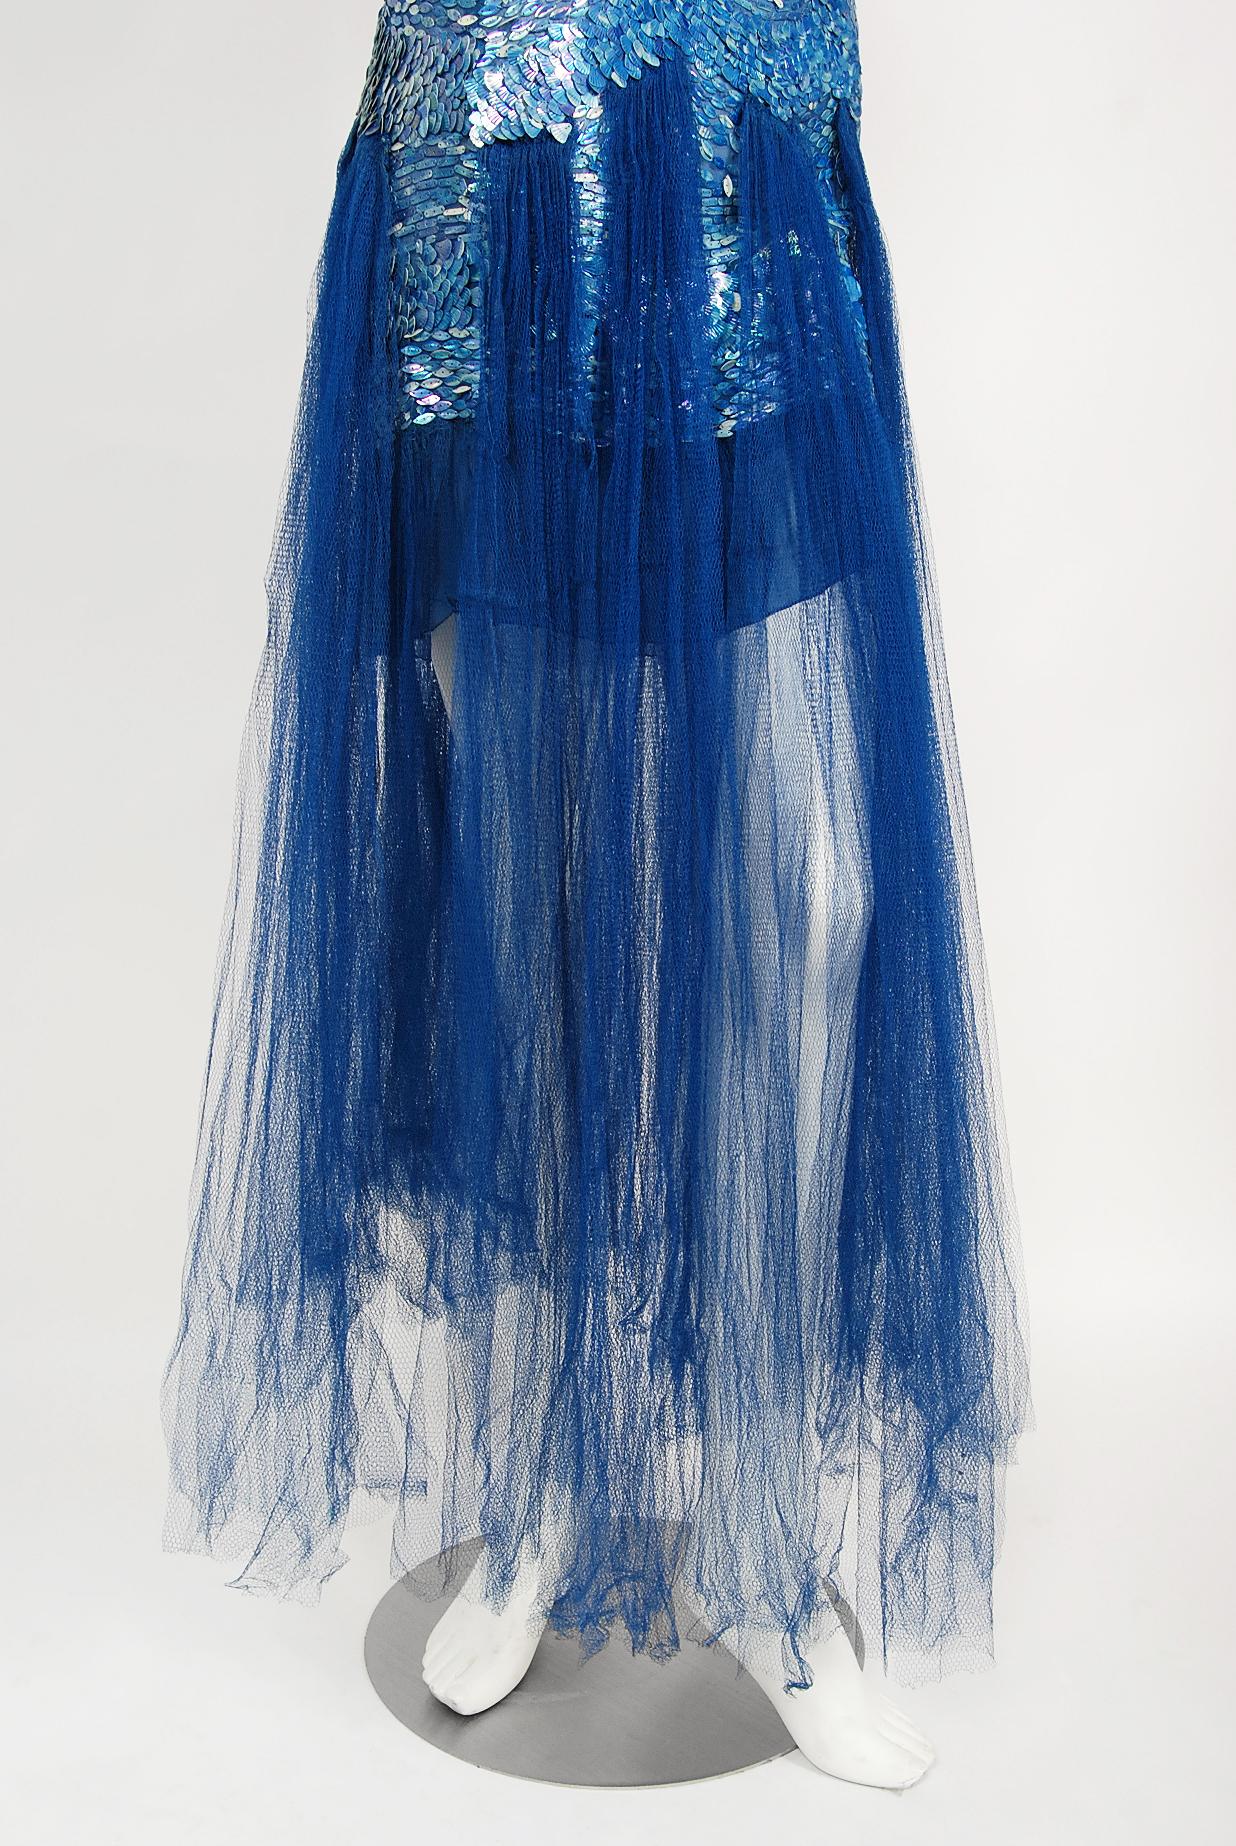 Vintage 1920's Couture Royal Blue Sequin Beaded Sheer Tulle Mermaid Flapper Gown 5